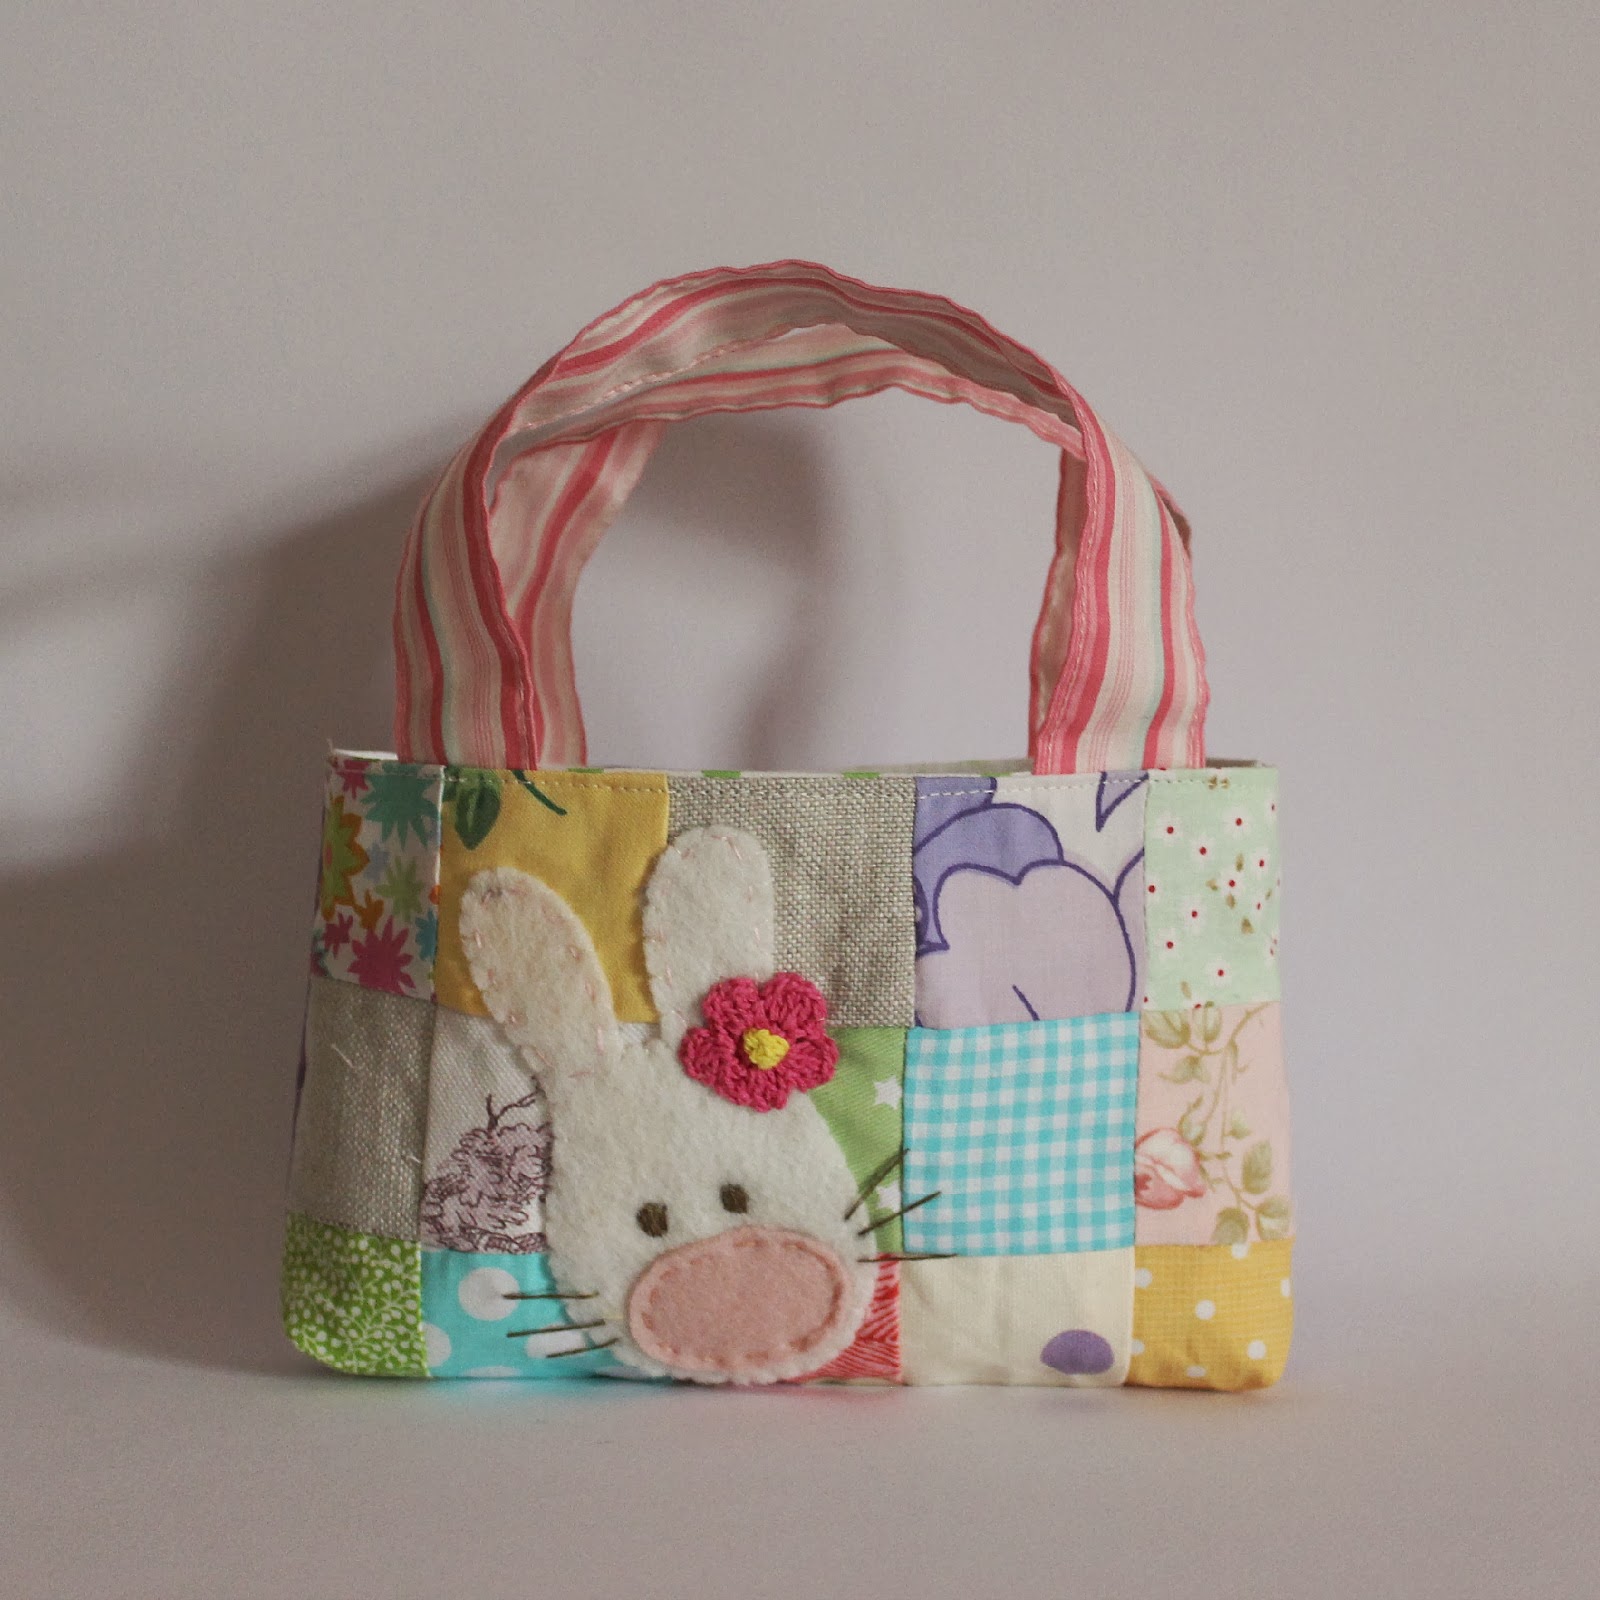 Roxy Creations: Sweet Easter bunny bags and softies